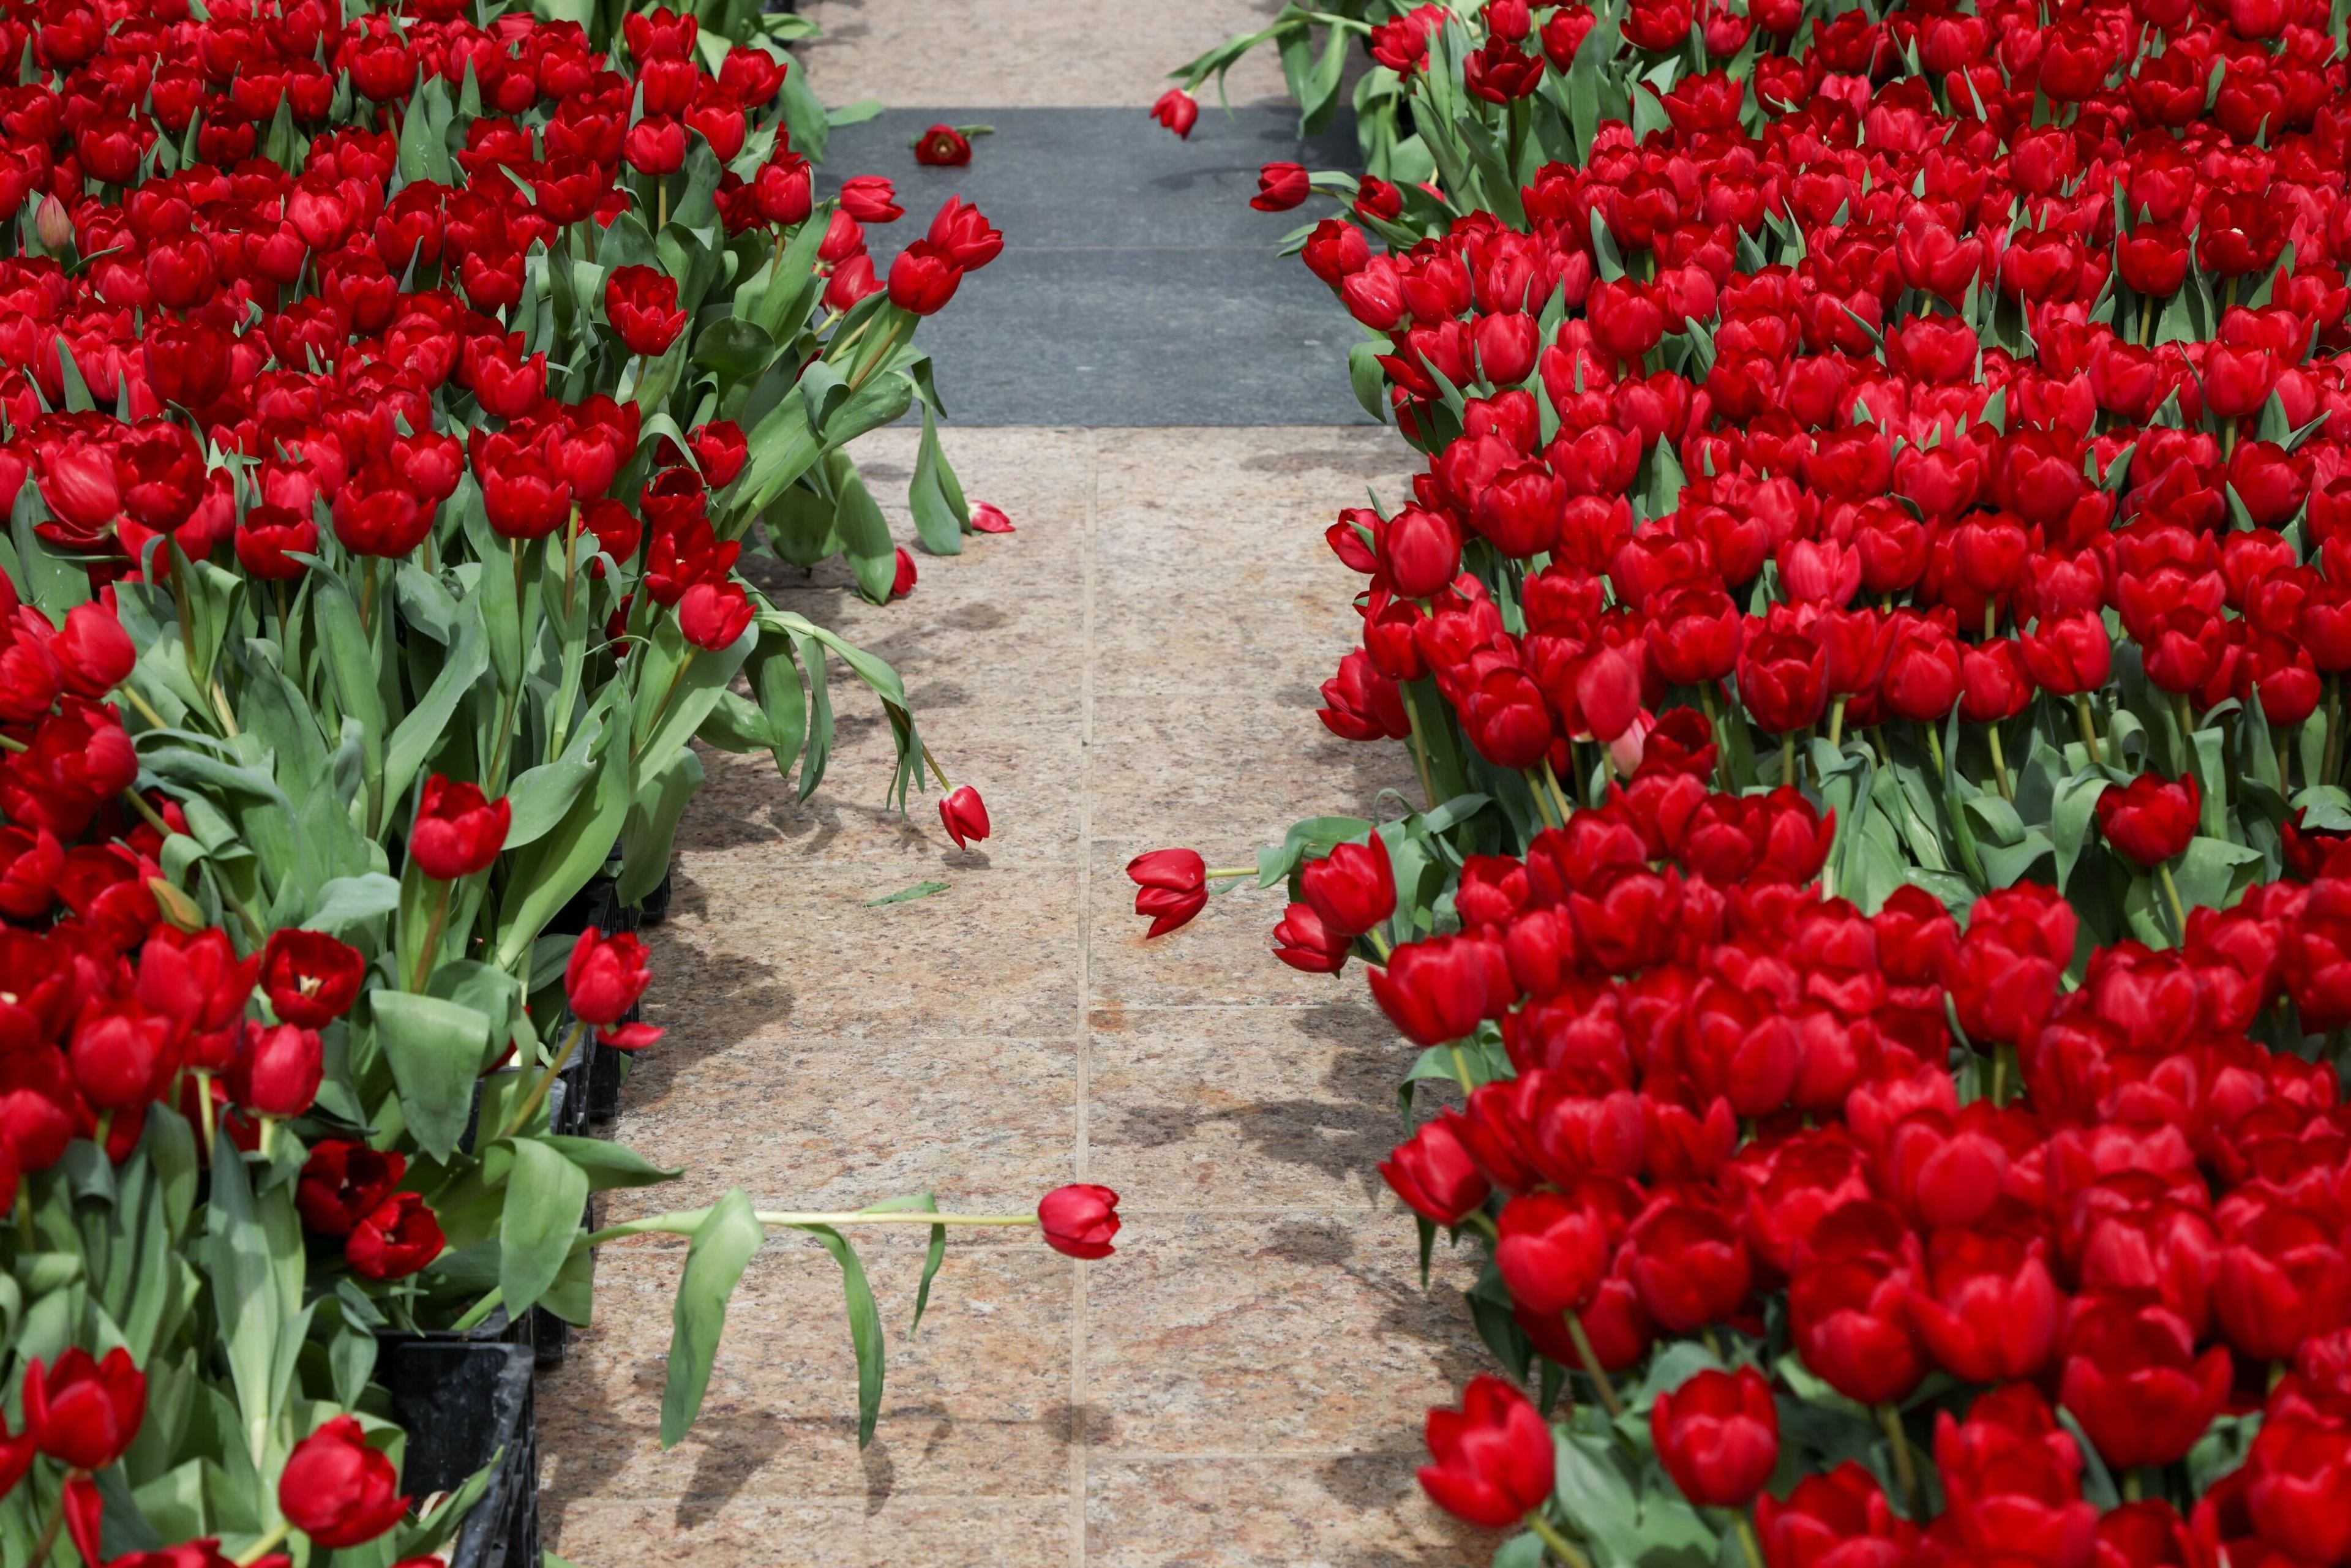 A path lined with vibrant red tulips, one tulip leaning over the walkway.